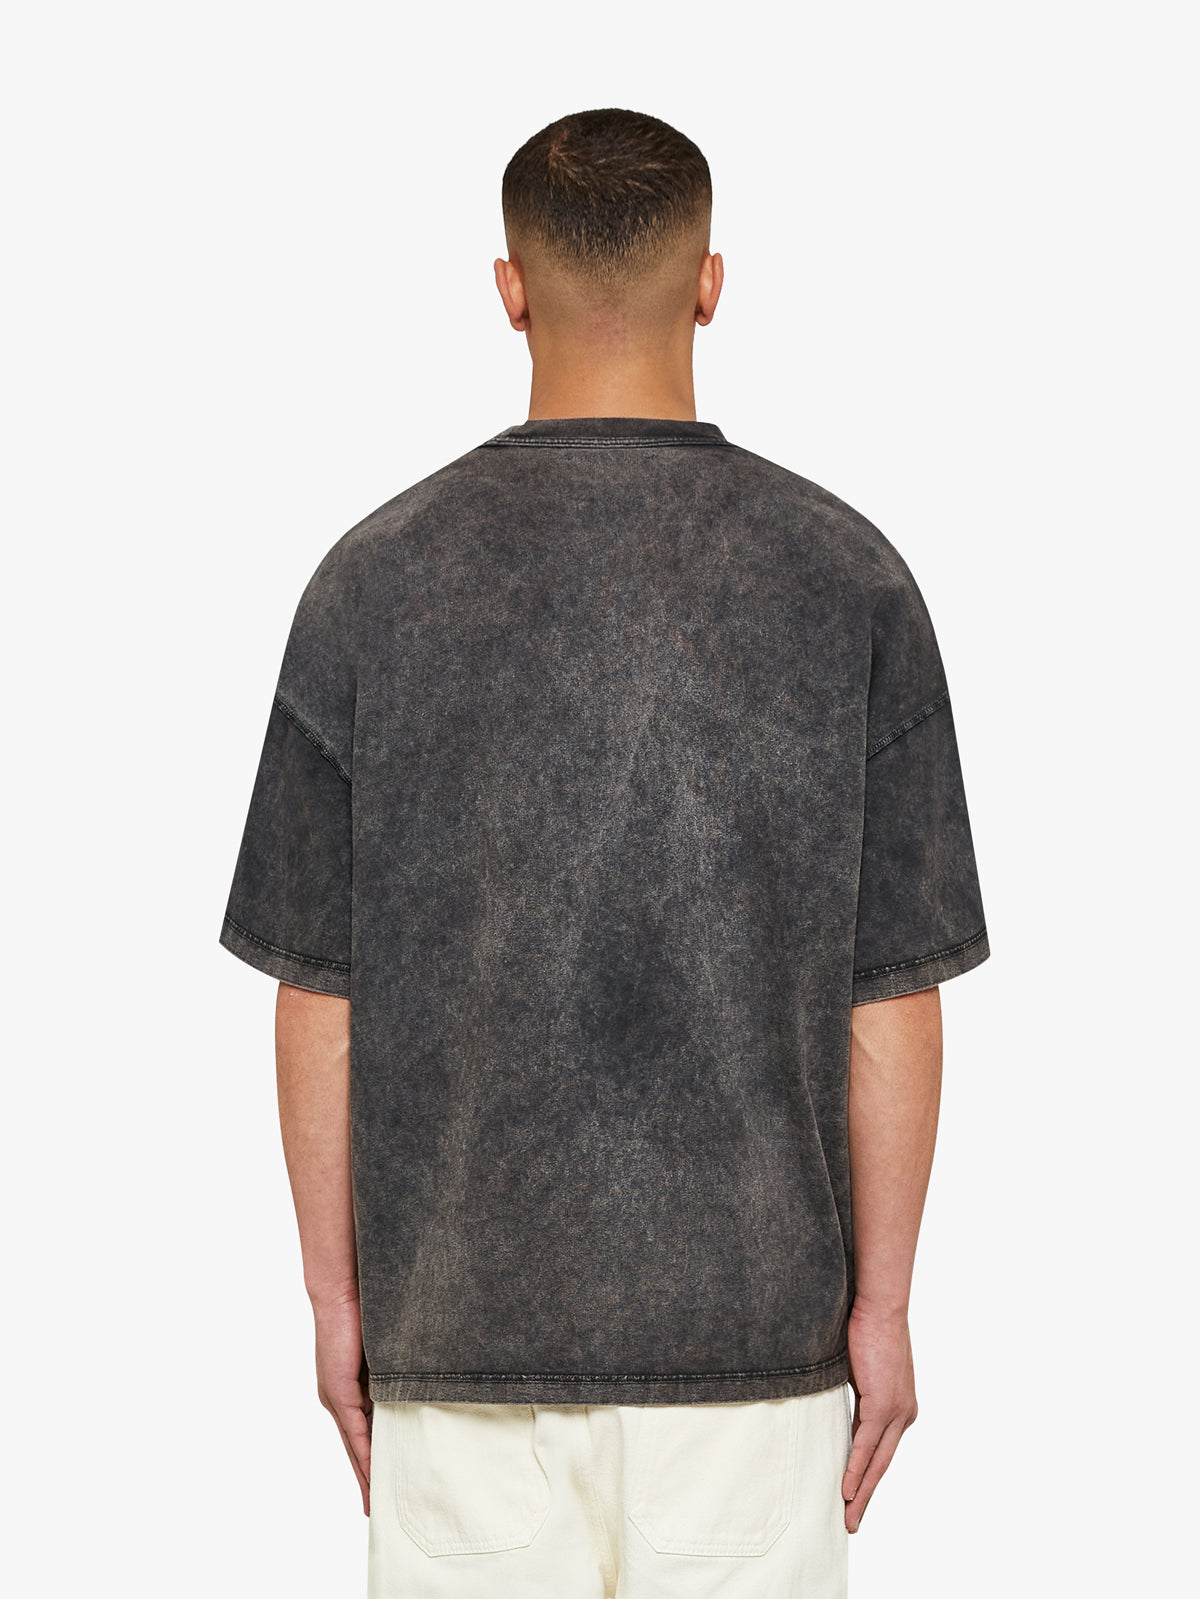 T-SHIRT SAINT AND SINNER - WASHED GREY